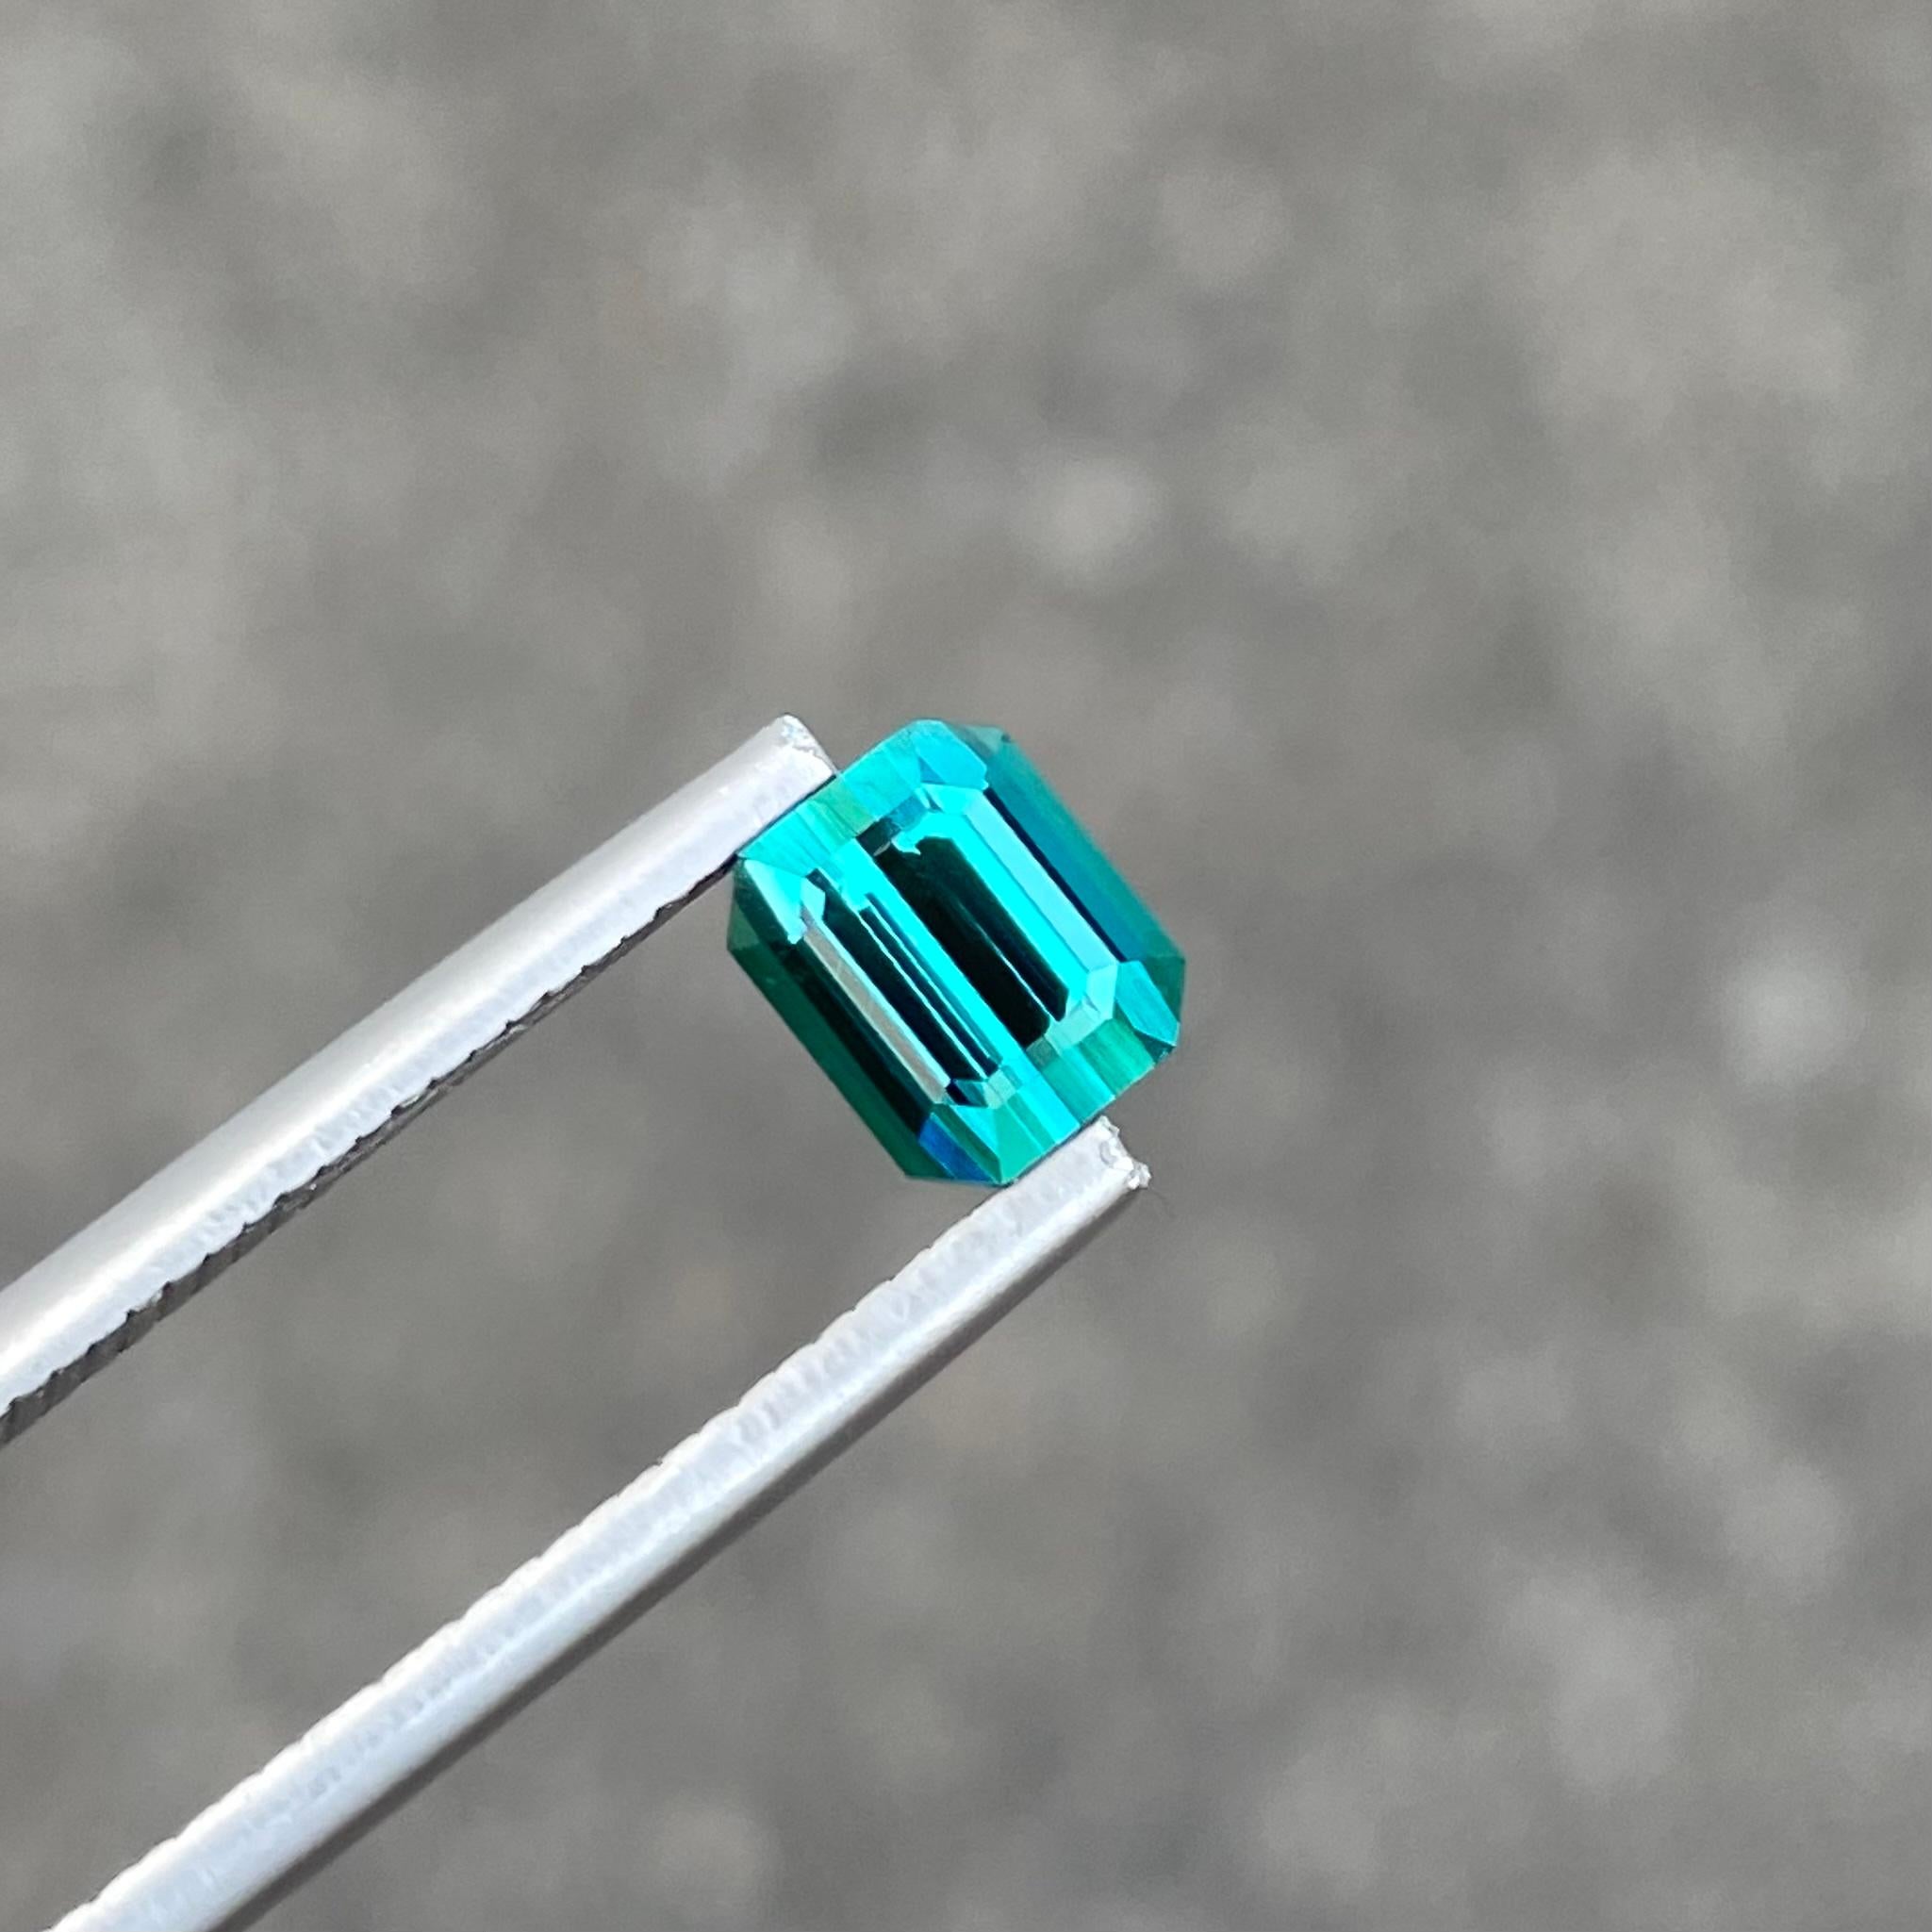 Weight 1.45 carats 
Dimensions 6.6 x 5.6 x 4.7 mm
Treatment None 
Origin Afghanistan 
Clarity Eye Clean 
Shape Octagon 
Cut Emerald




Discover the alluring charm of our Blue Tourmaline, a 1.45 carat gemstone of unparalleled beauty, cut to